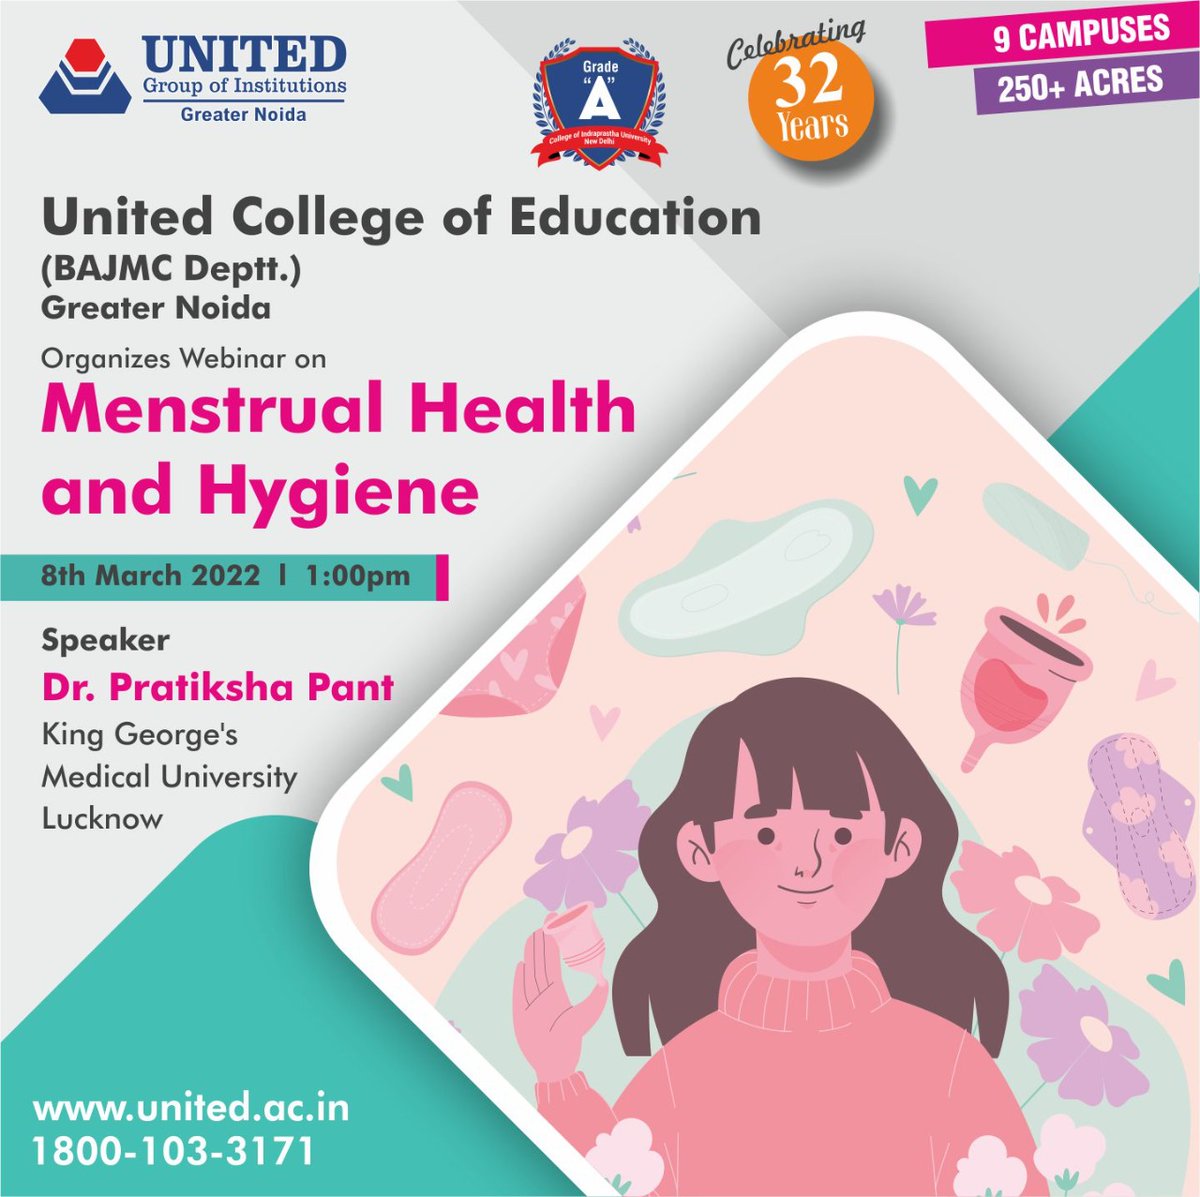 The BA(JMC) department of the United College of Education, affiliated to GGSIPU is organizing a webinar on the occasion of International Women's Day 
#UnitedCollegeOfEducation #UCE #UnitedGroupOfInstitutions #UGI
#InternationalWomensDay2022
#MenstrualHealthAndHygiene #WomensDay